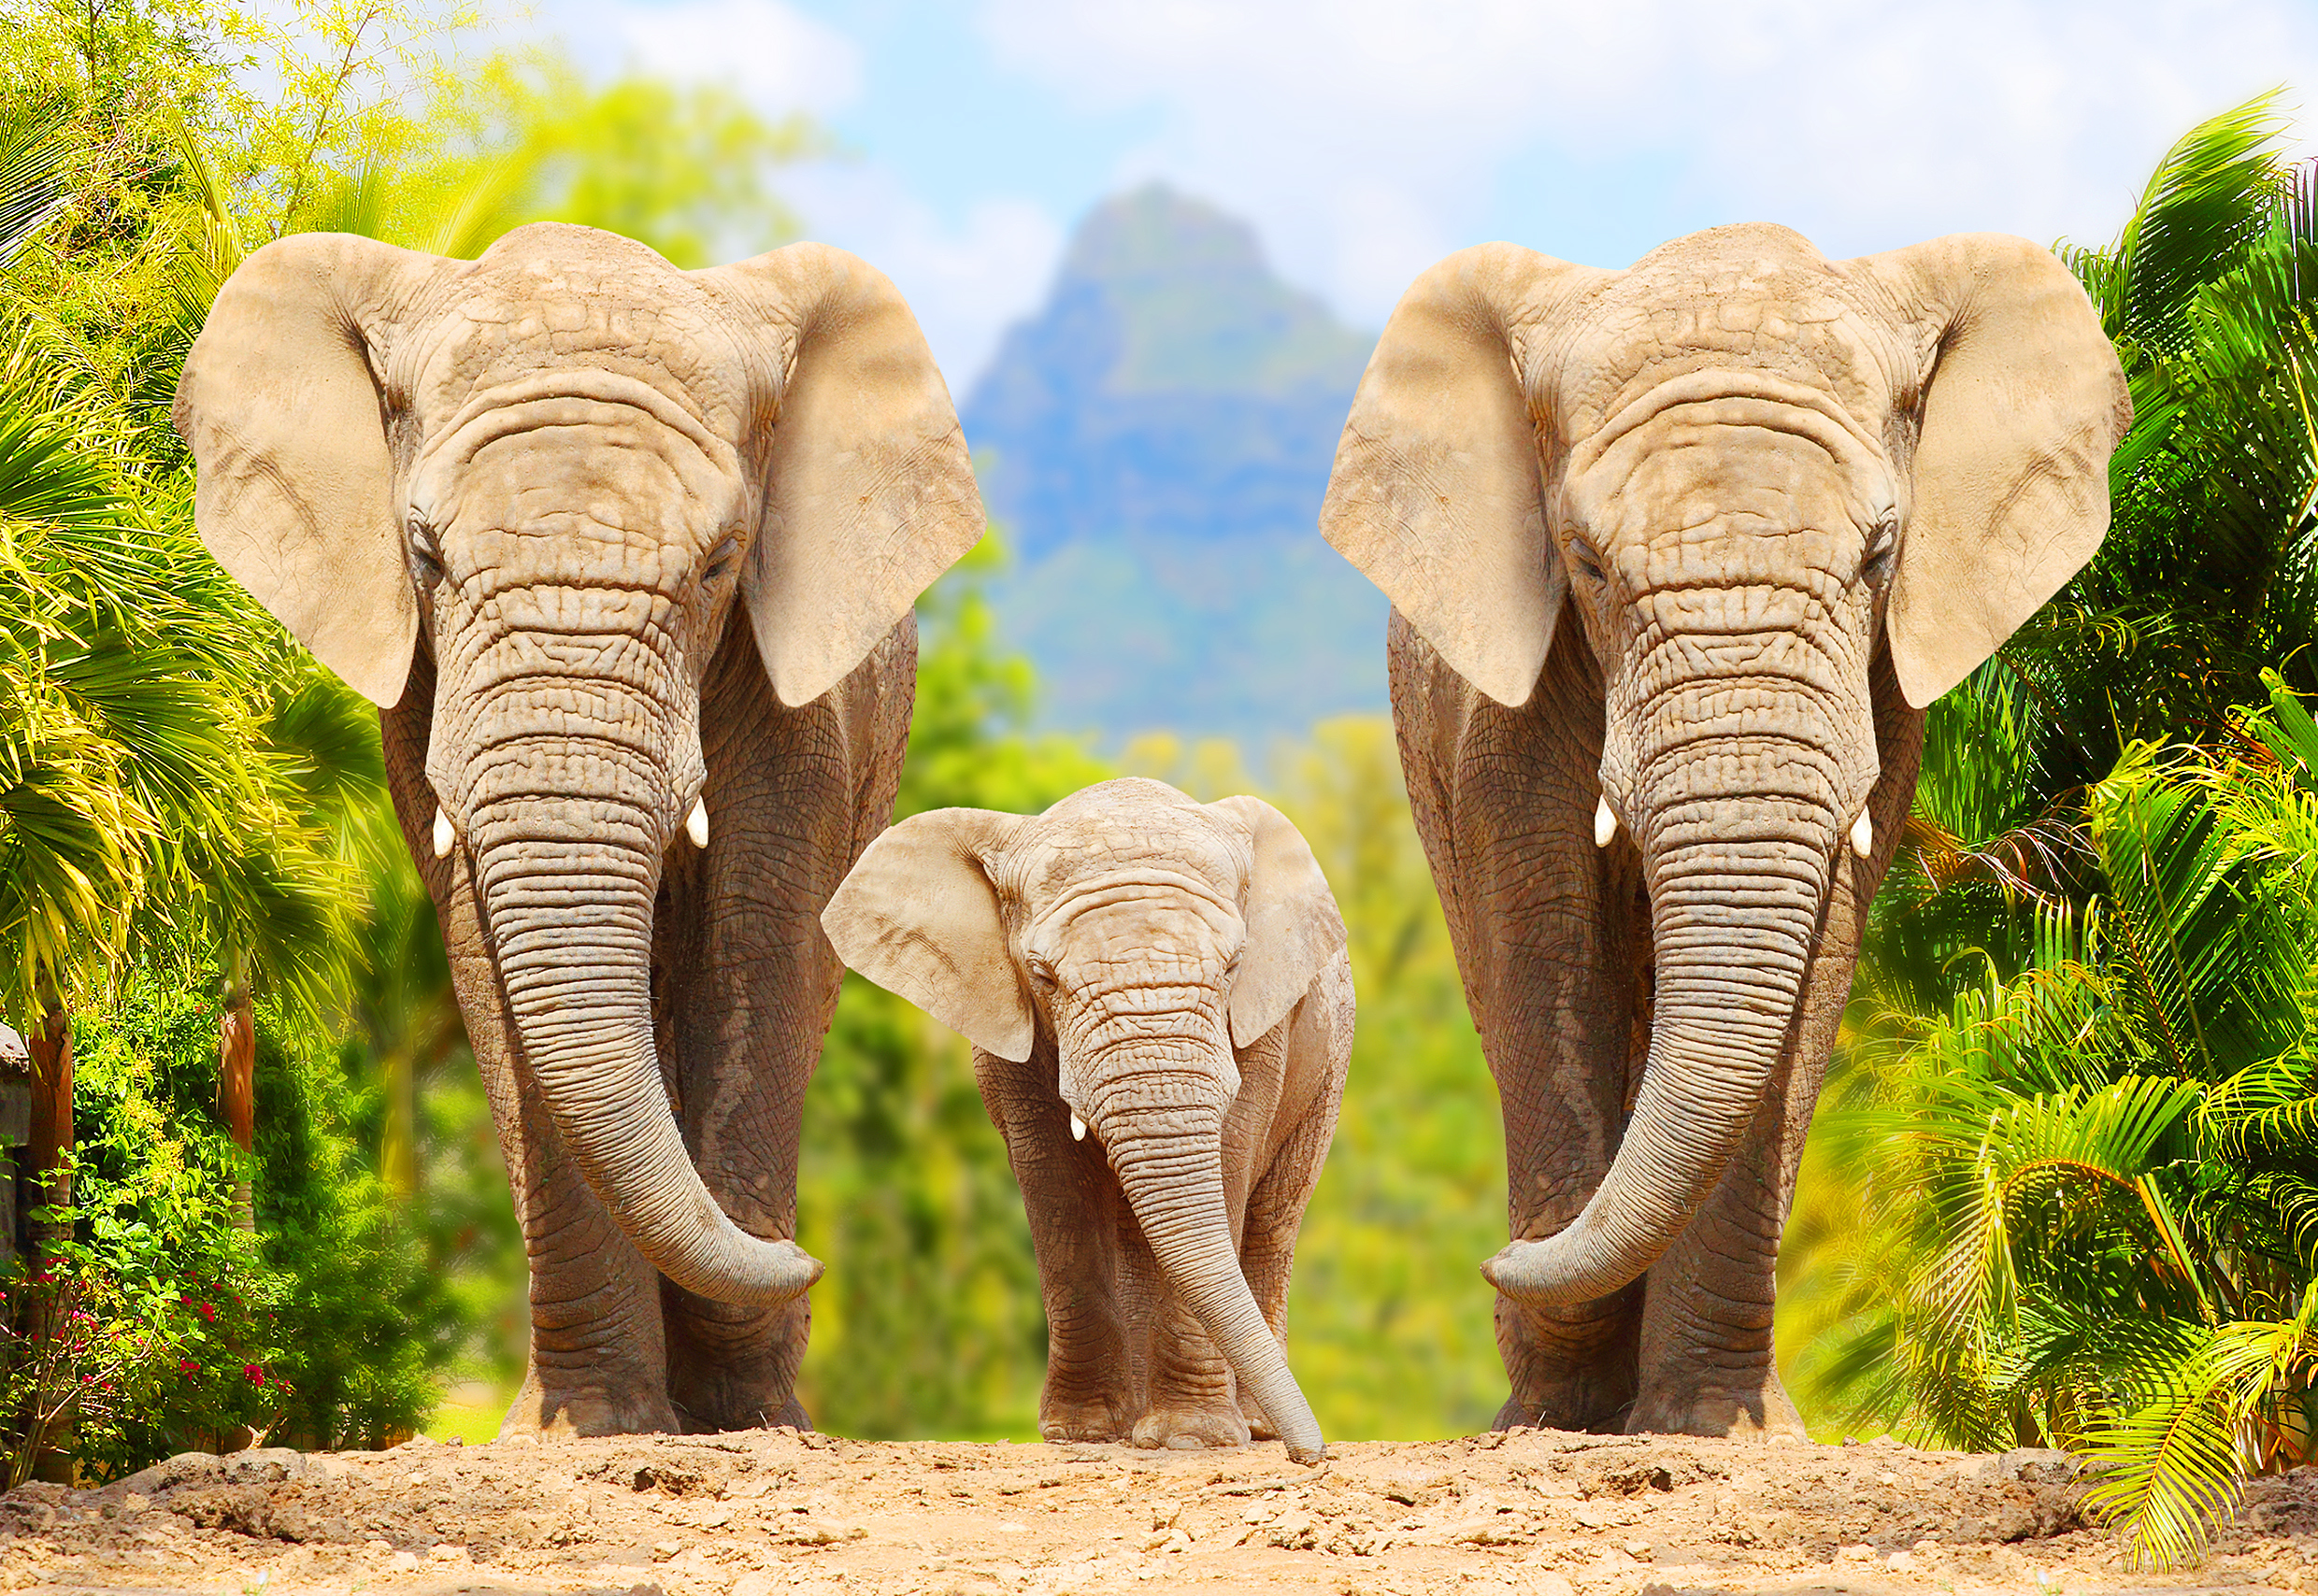 Three elephants, two large and one small, walk towards the camera on a dirt path. Lush green foliage surrounds them, and there is a mountain visible in the background under a blue sky with scattered clouds.